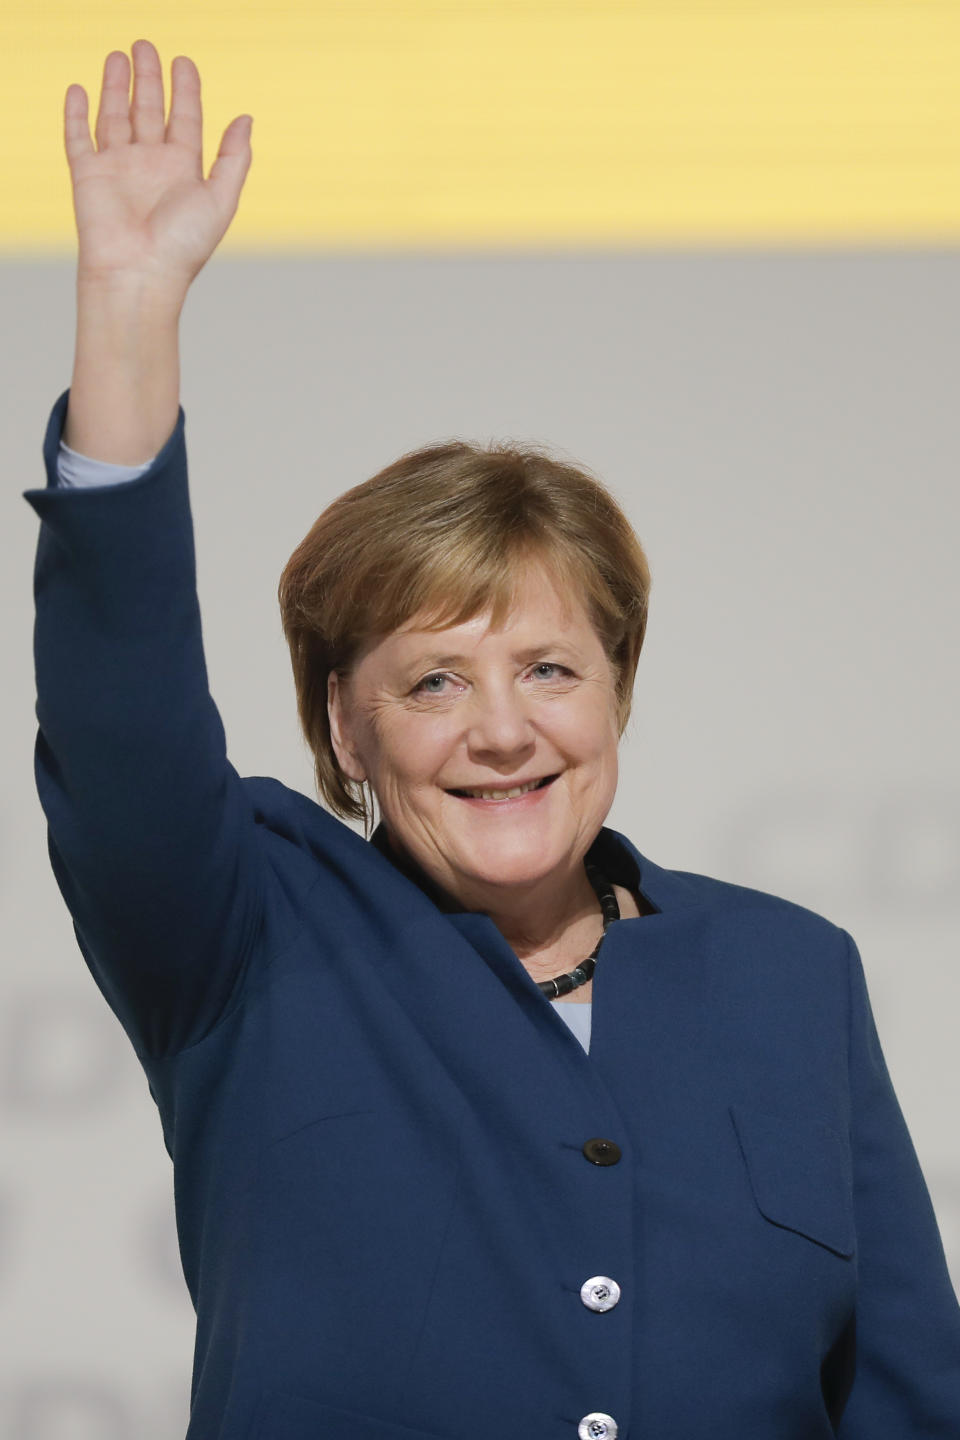 Christian Democratic Union, CDU, chairwoman and German Chancellor Angela Merkel waves as she receives the applause after her speech during a party convention of the Christian Democratic Party CDU in Hamburg, Germany, Friday, Dec. 7, 2018. 1001 delegates are electing a successor of German Chancellor Angela Merkel who doesn't run for party chairmanship after more than 18 years at the helm of the party. (AP Photo/Markus Schreiber)